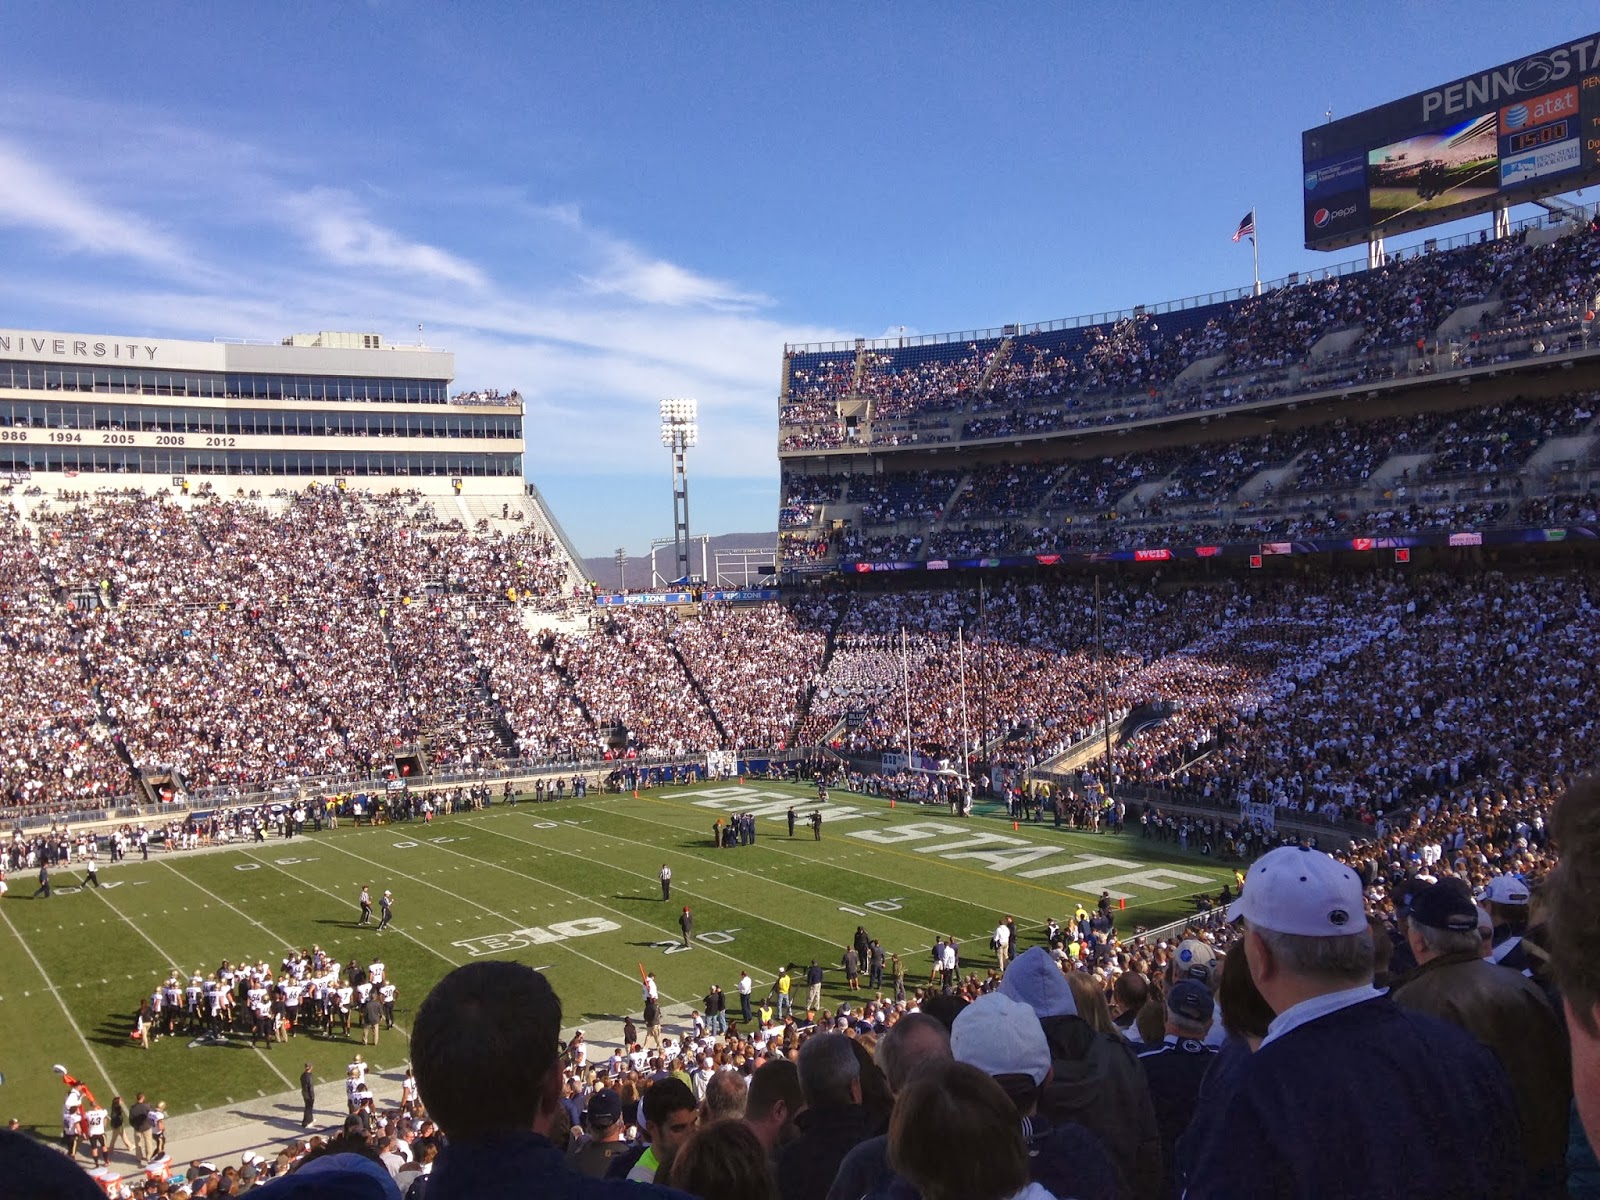 Where To Stay In State College, PA For Penn State Football Weekends